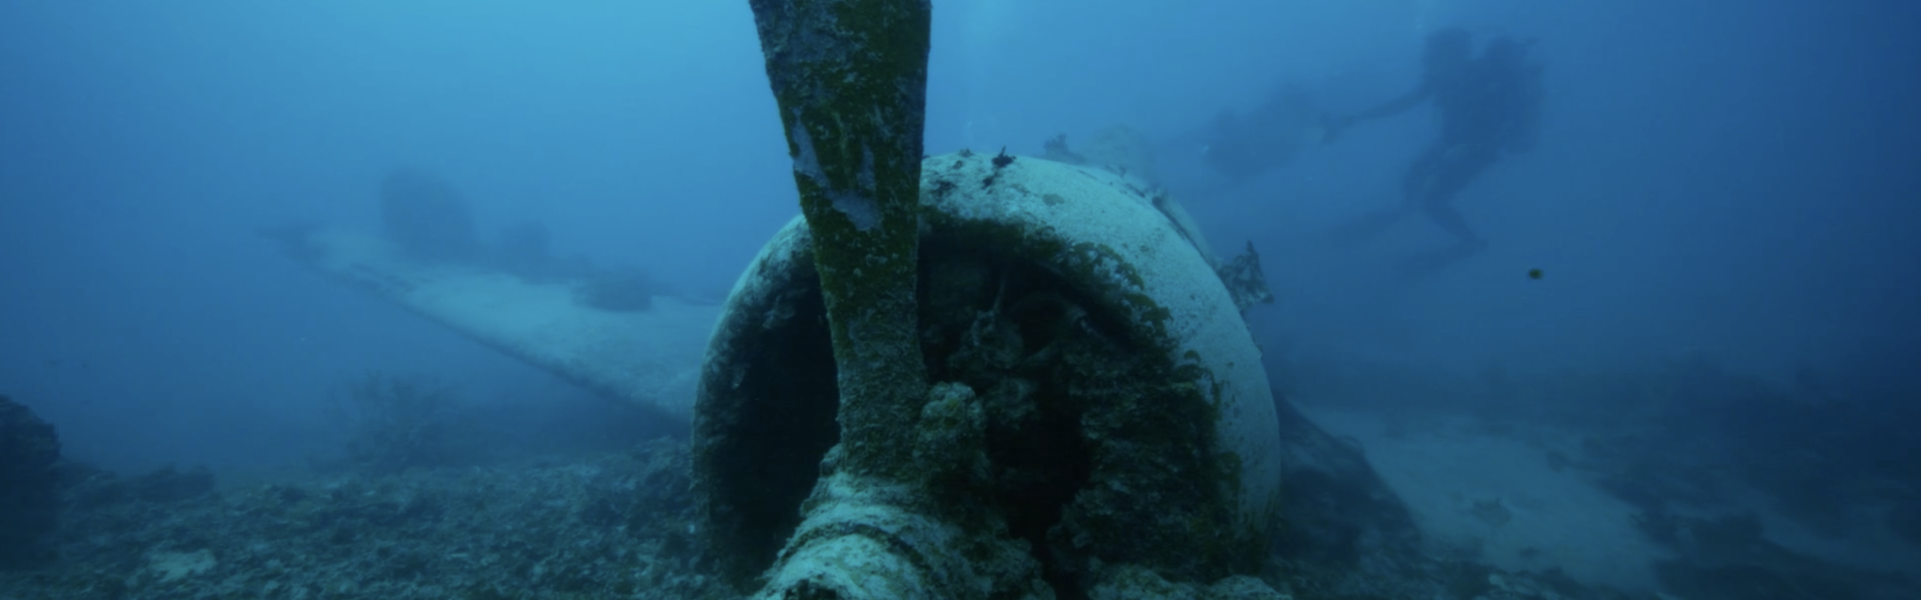 A screenshot from the documentary To What Remains, shot of diver underwater close to an abandoned propeler